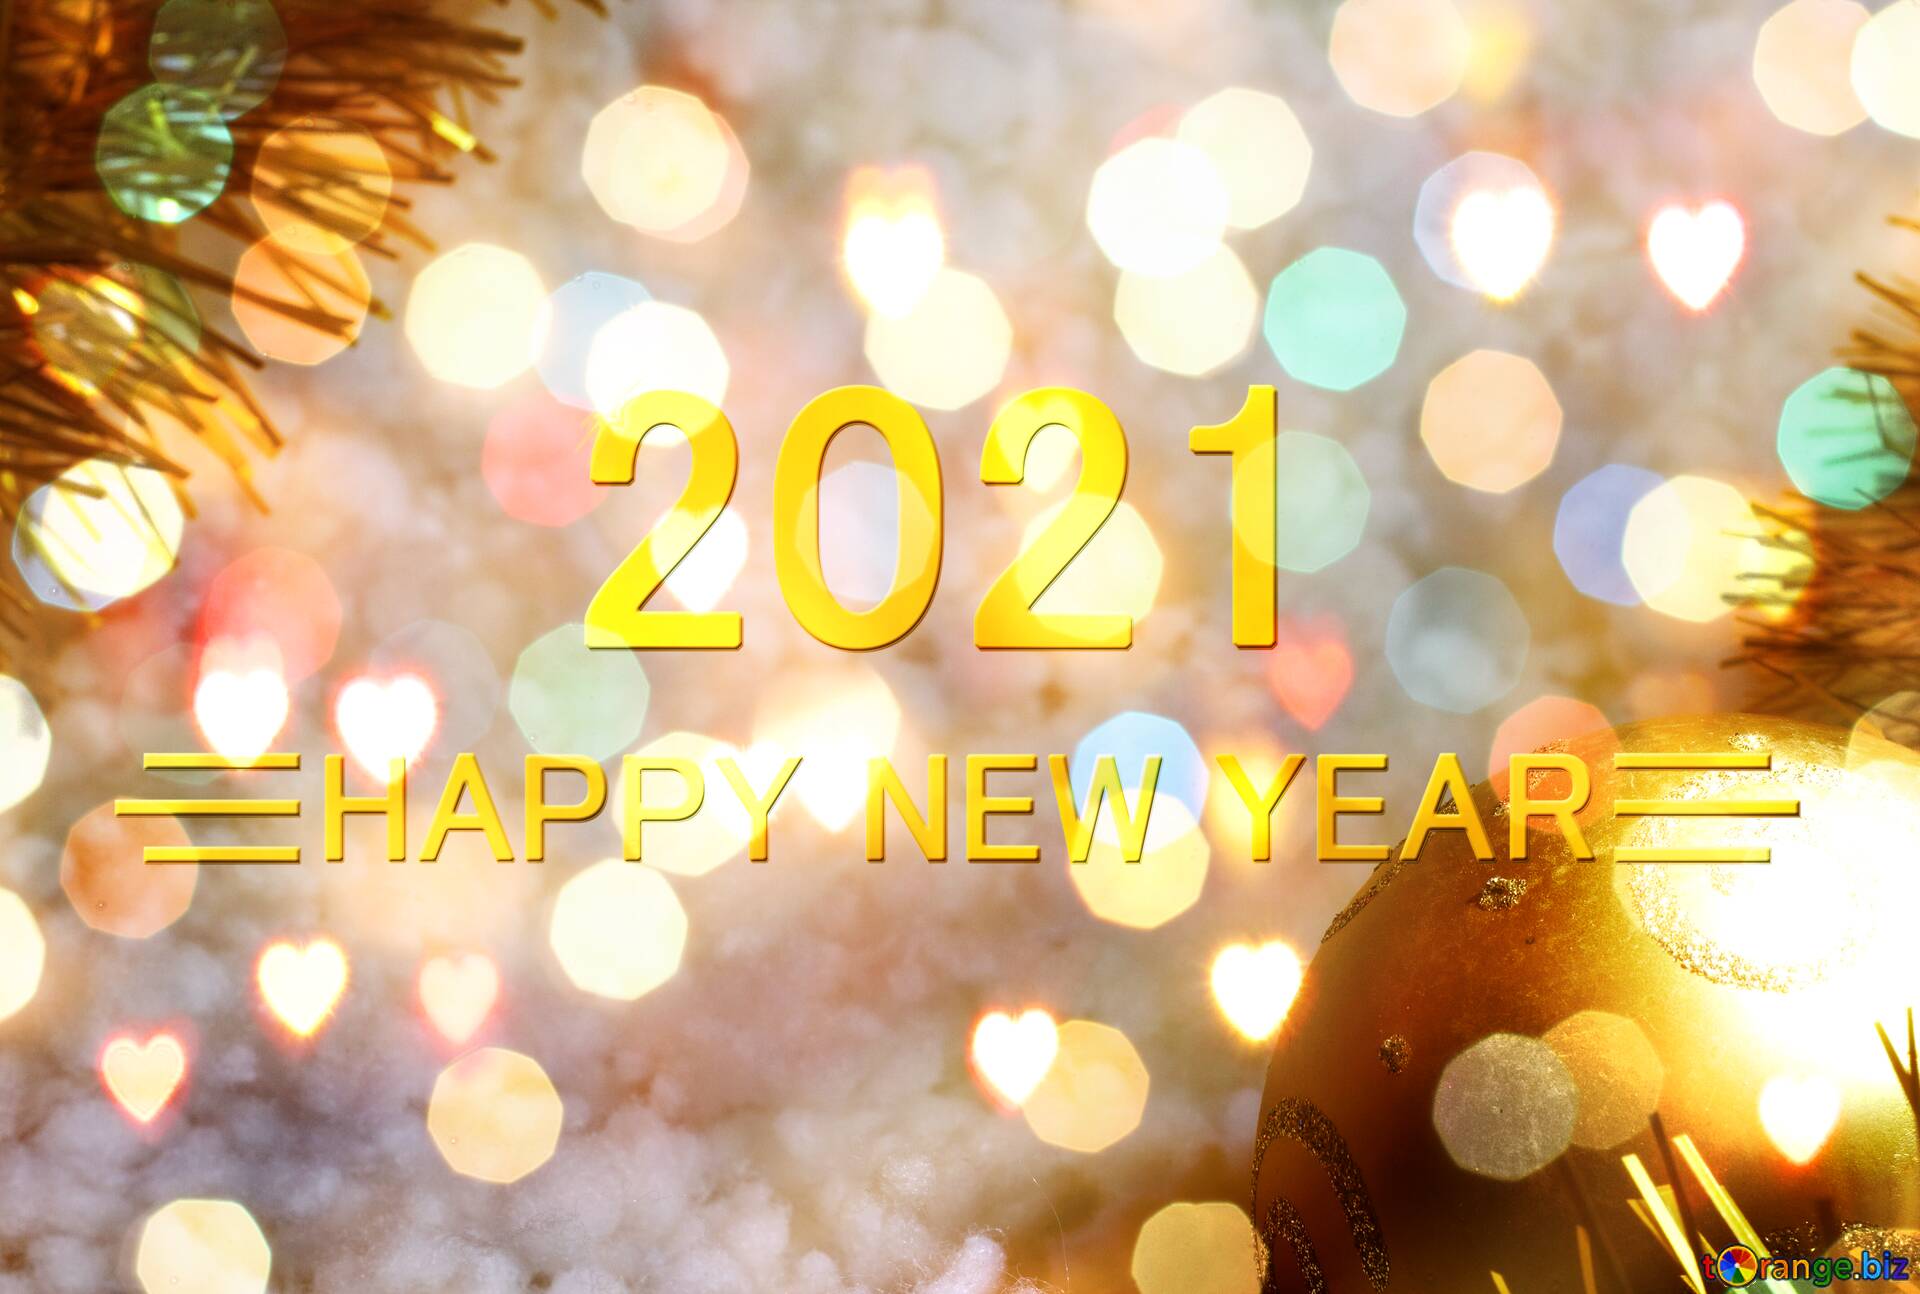 Download Free Picture Background Welcome Happy New Year 2021 On CC BY License Free Image Stock TOrange.biz Fx №212330